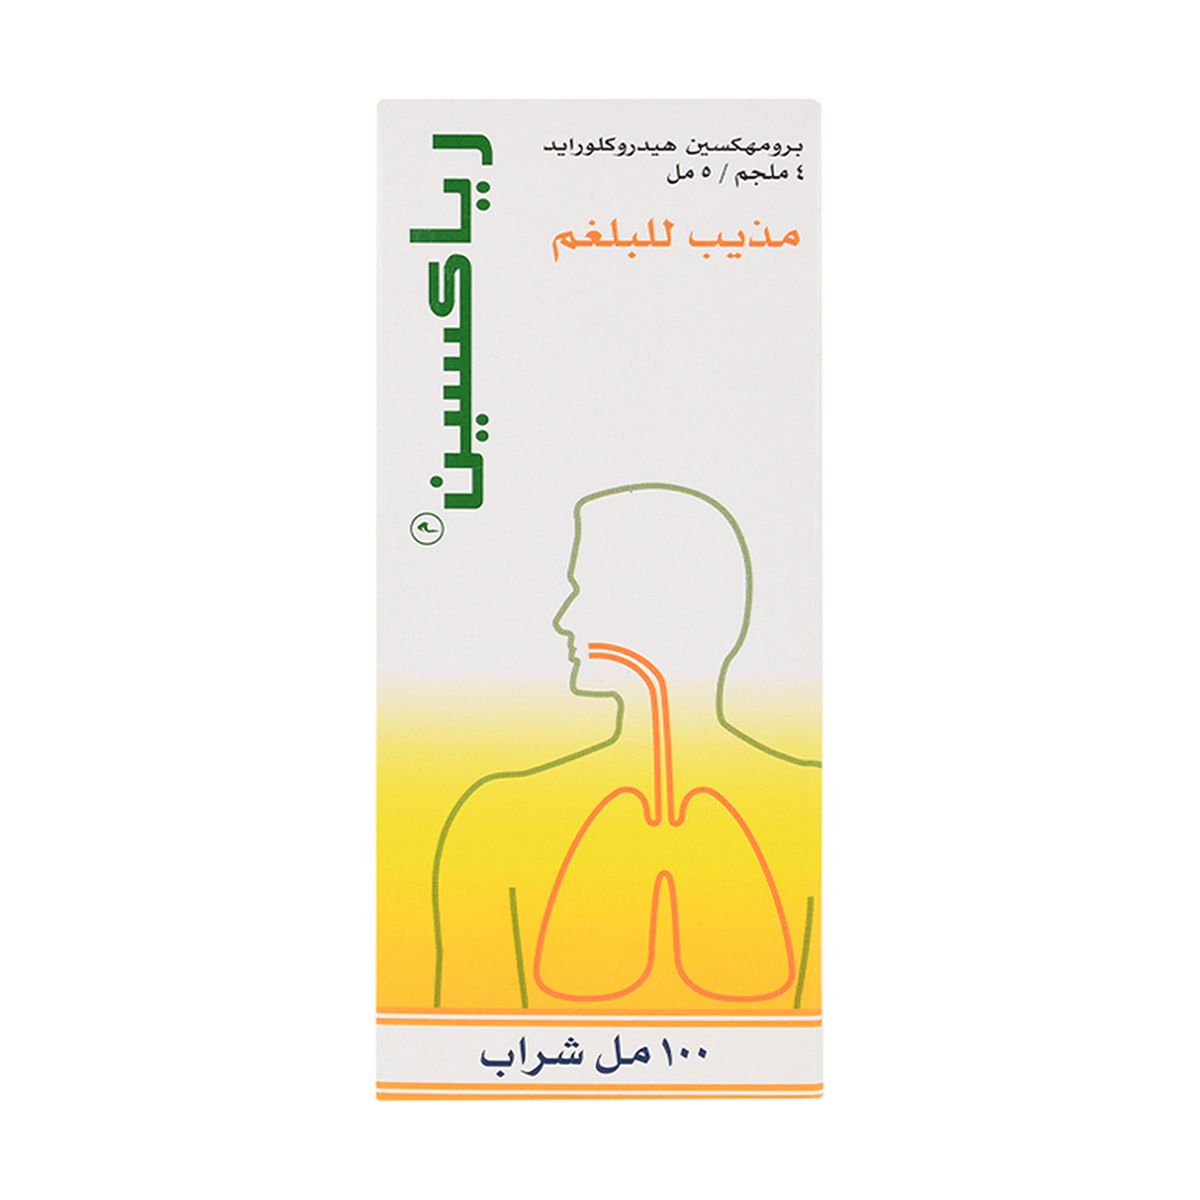 Riaxine, Syrup, Relieves Cough (mucolytic) - 100 Ml